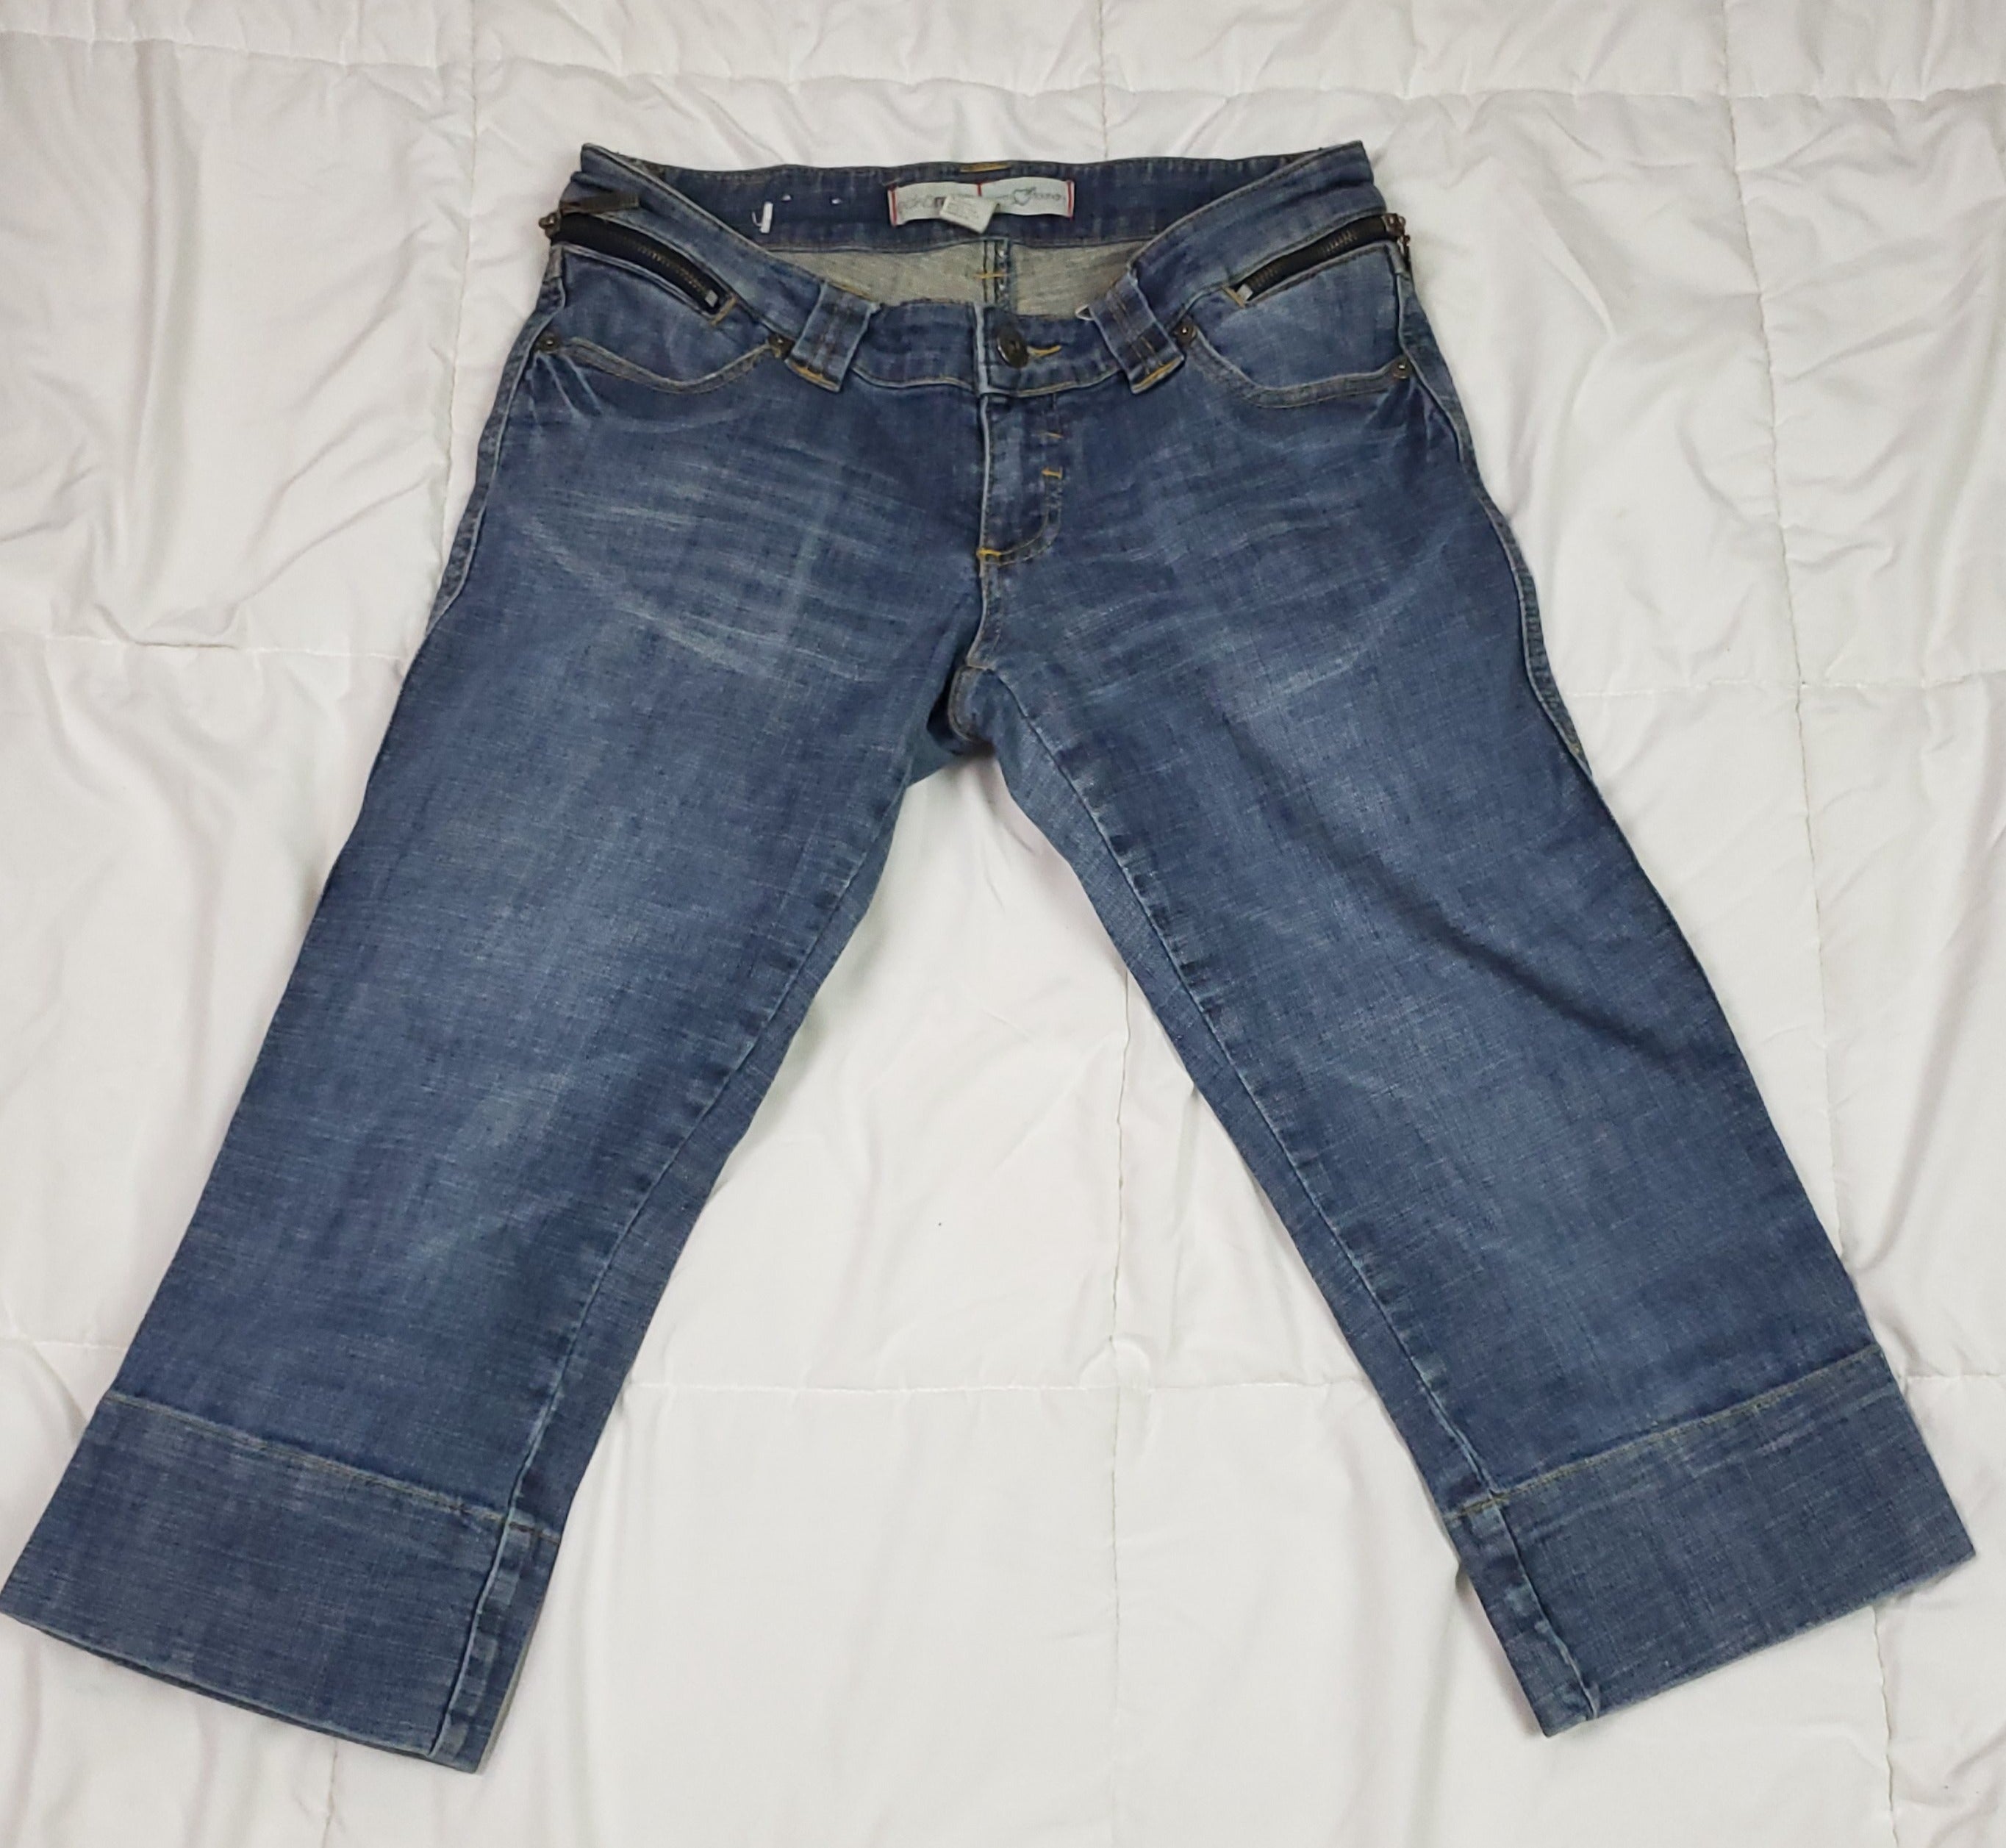 size 9 womens jeans